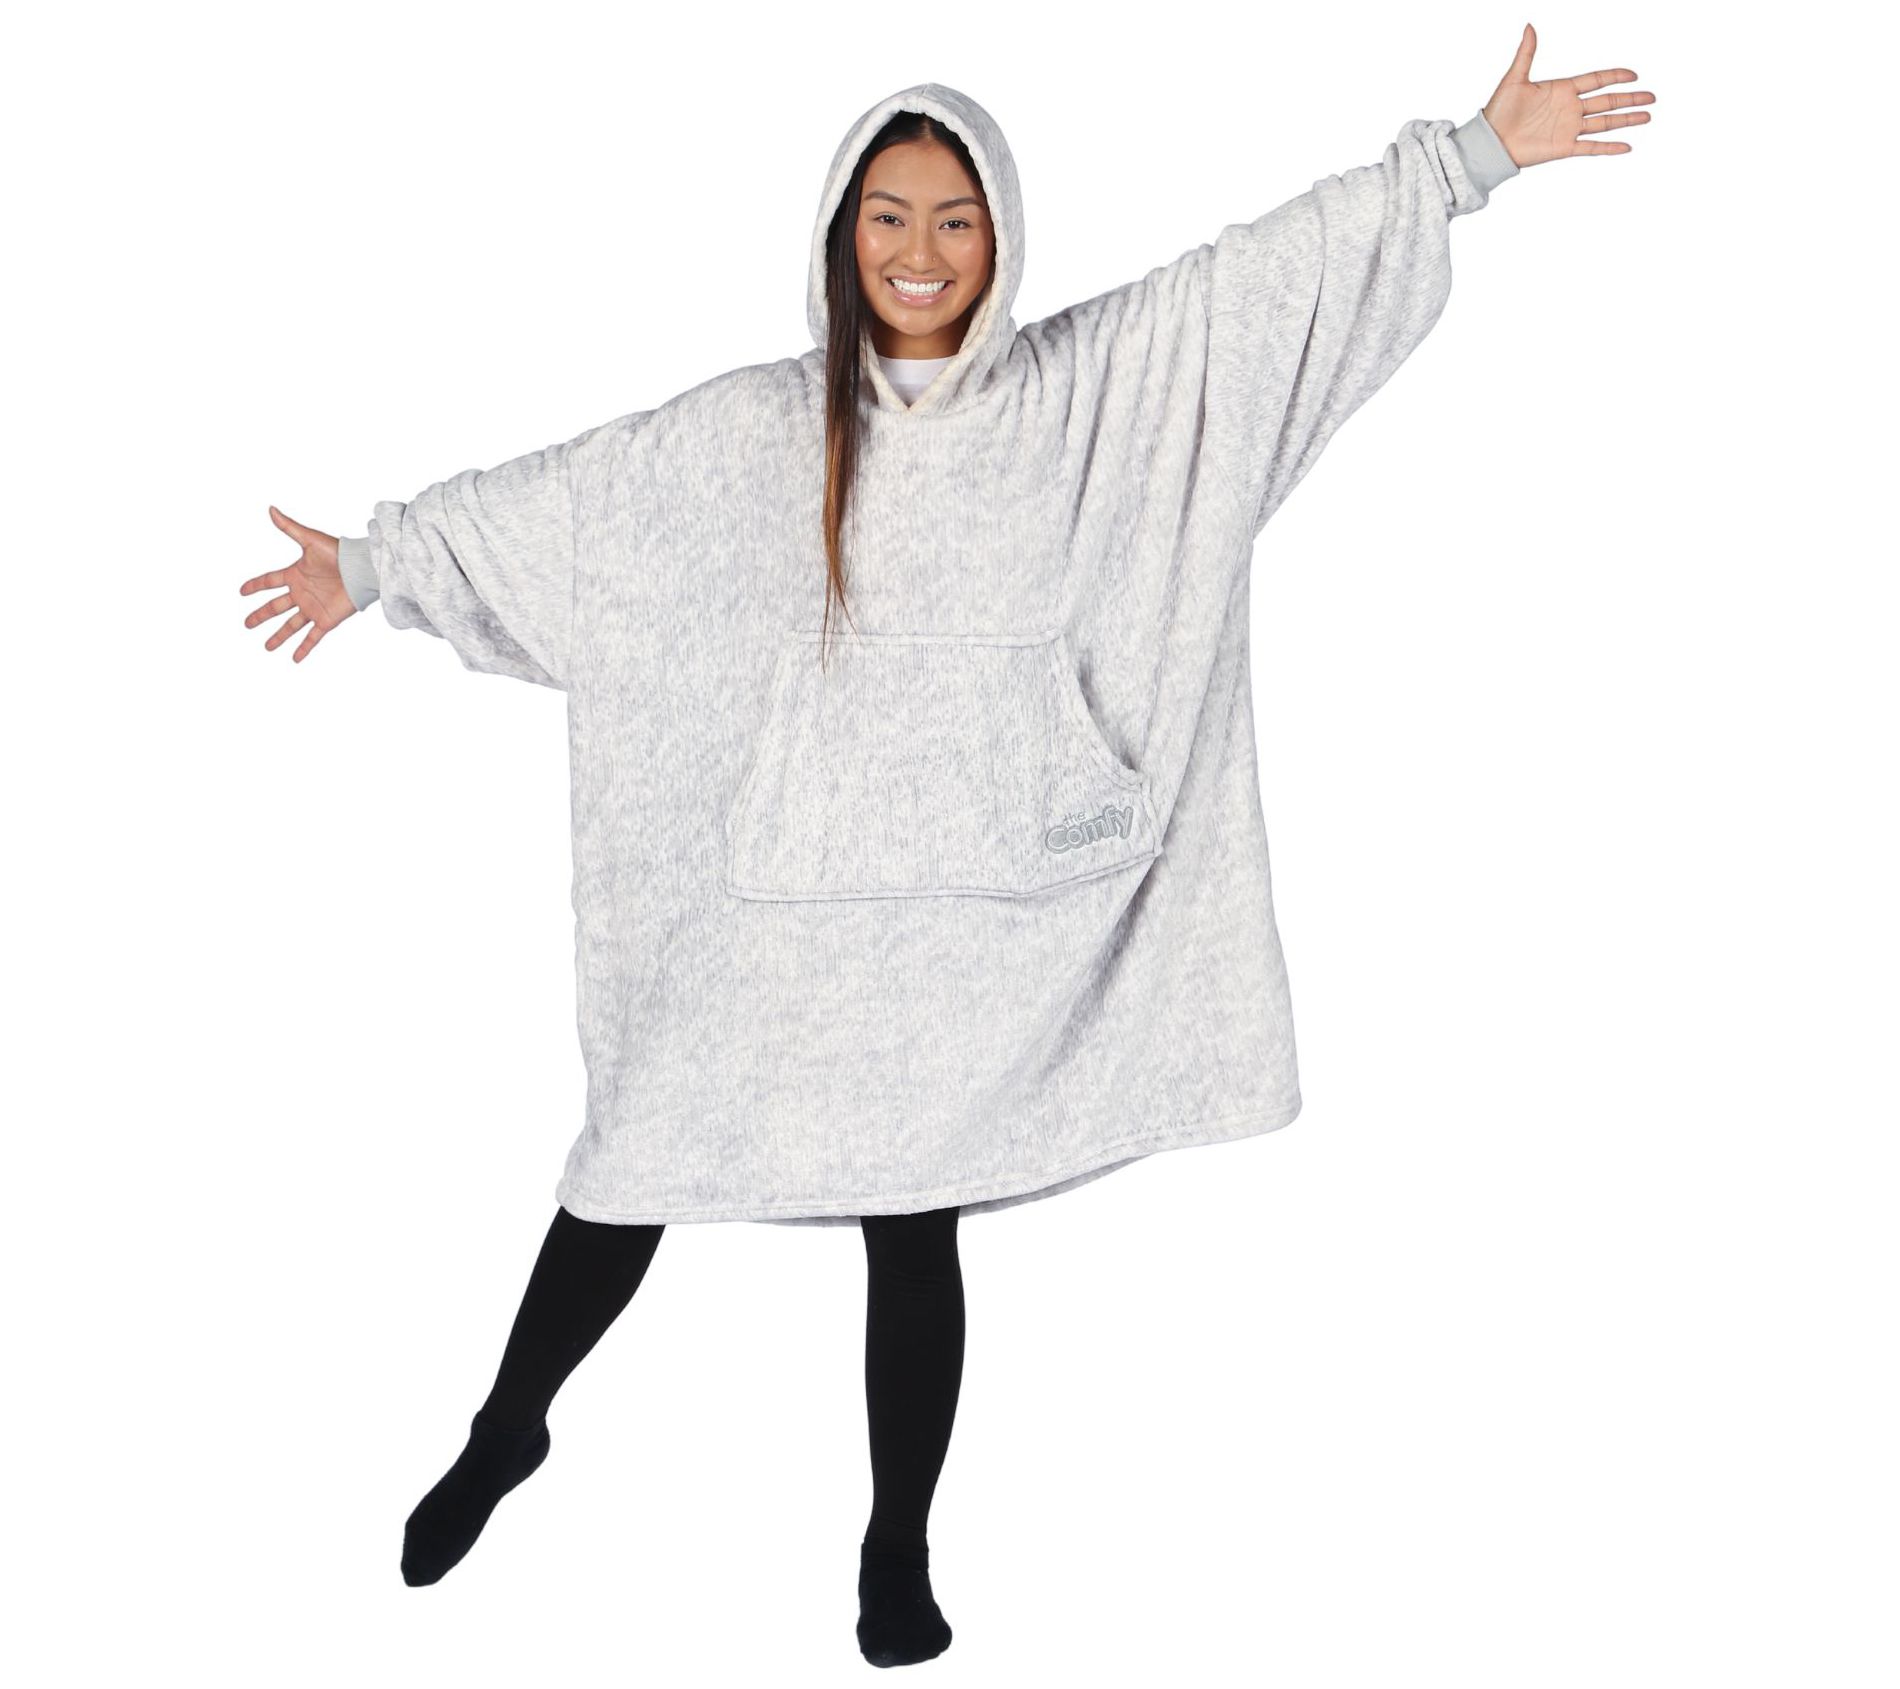 The Comfy Dream Wearable Blanket 